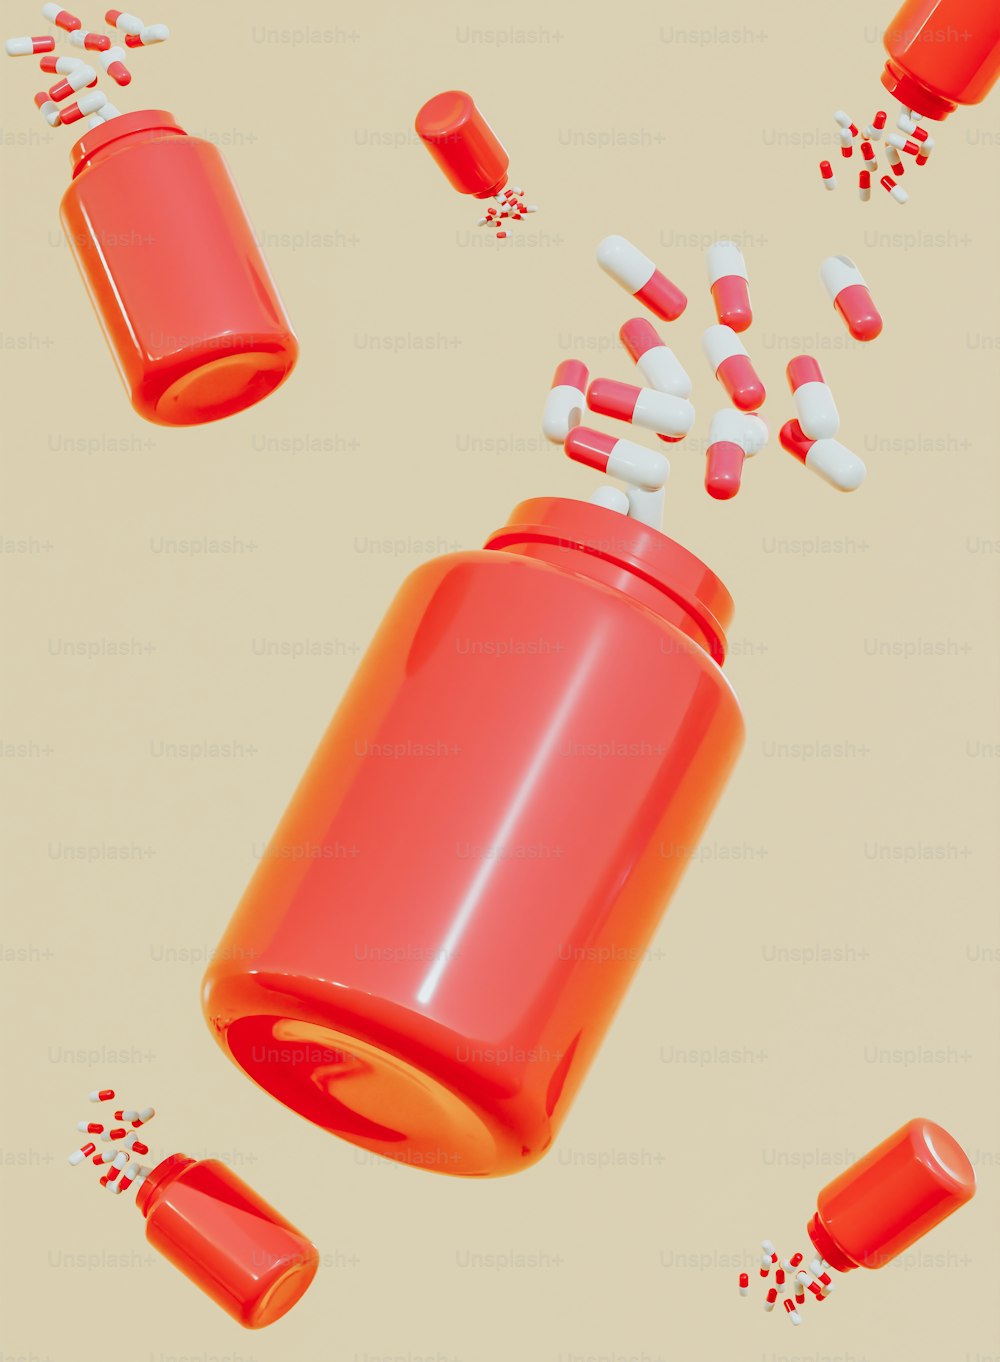 a bottle of pills falling out of it